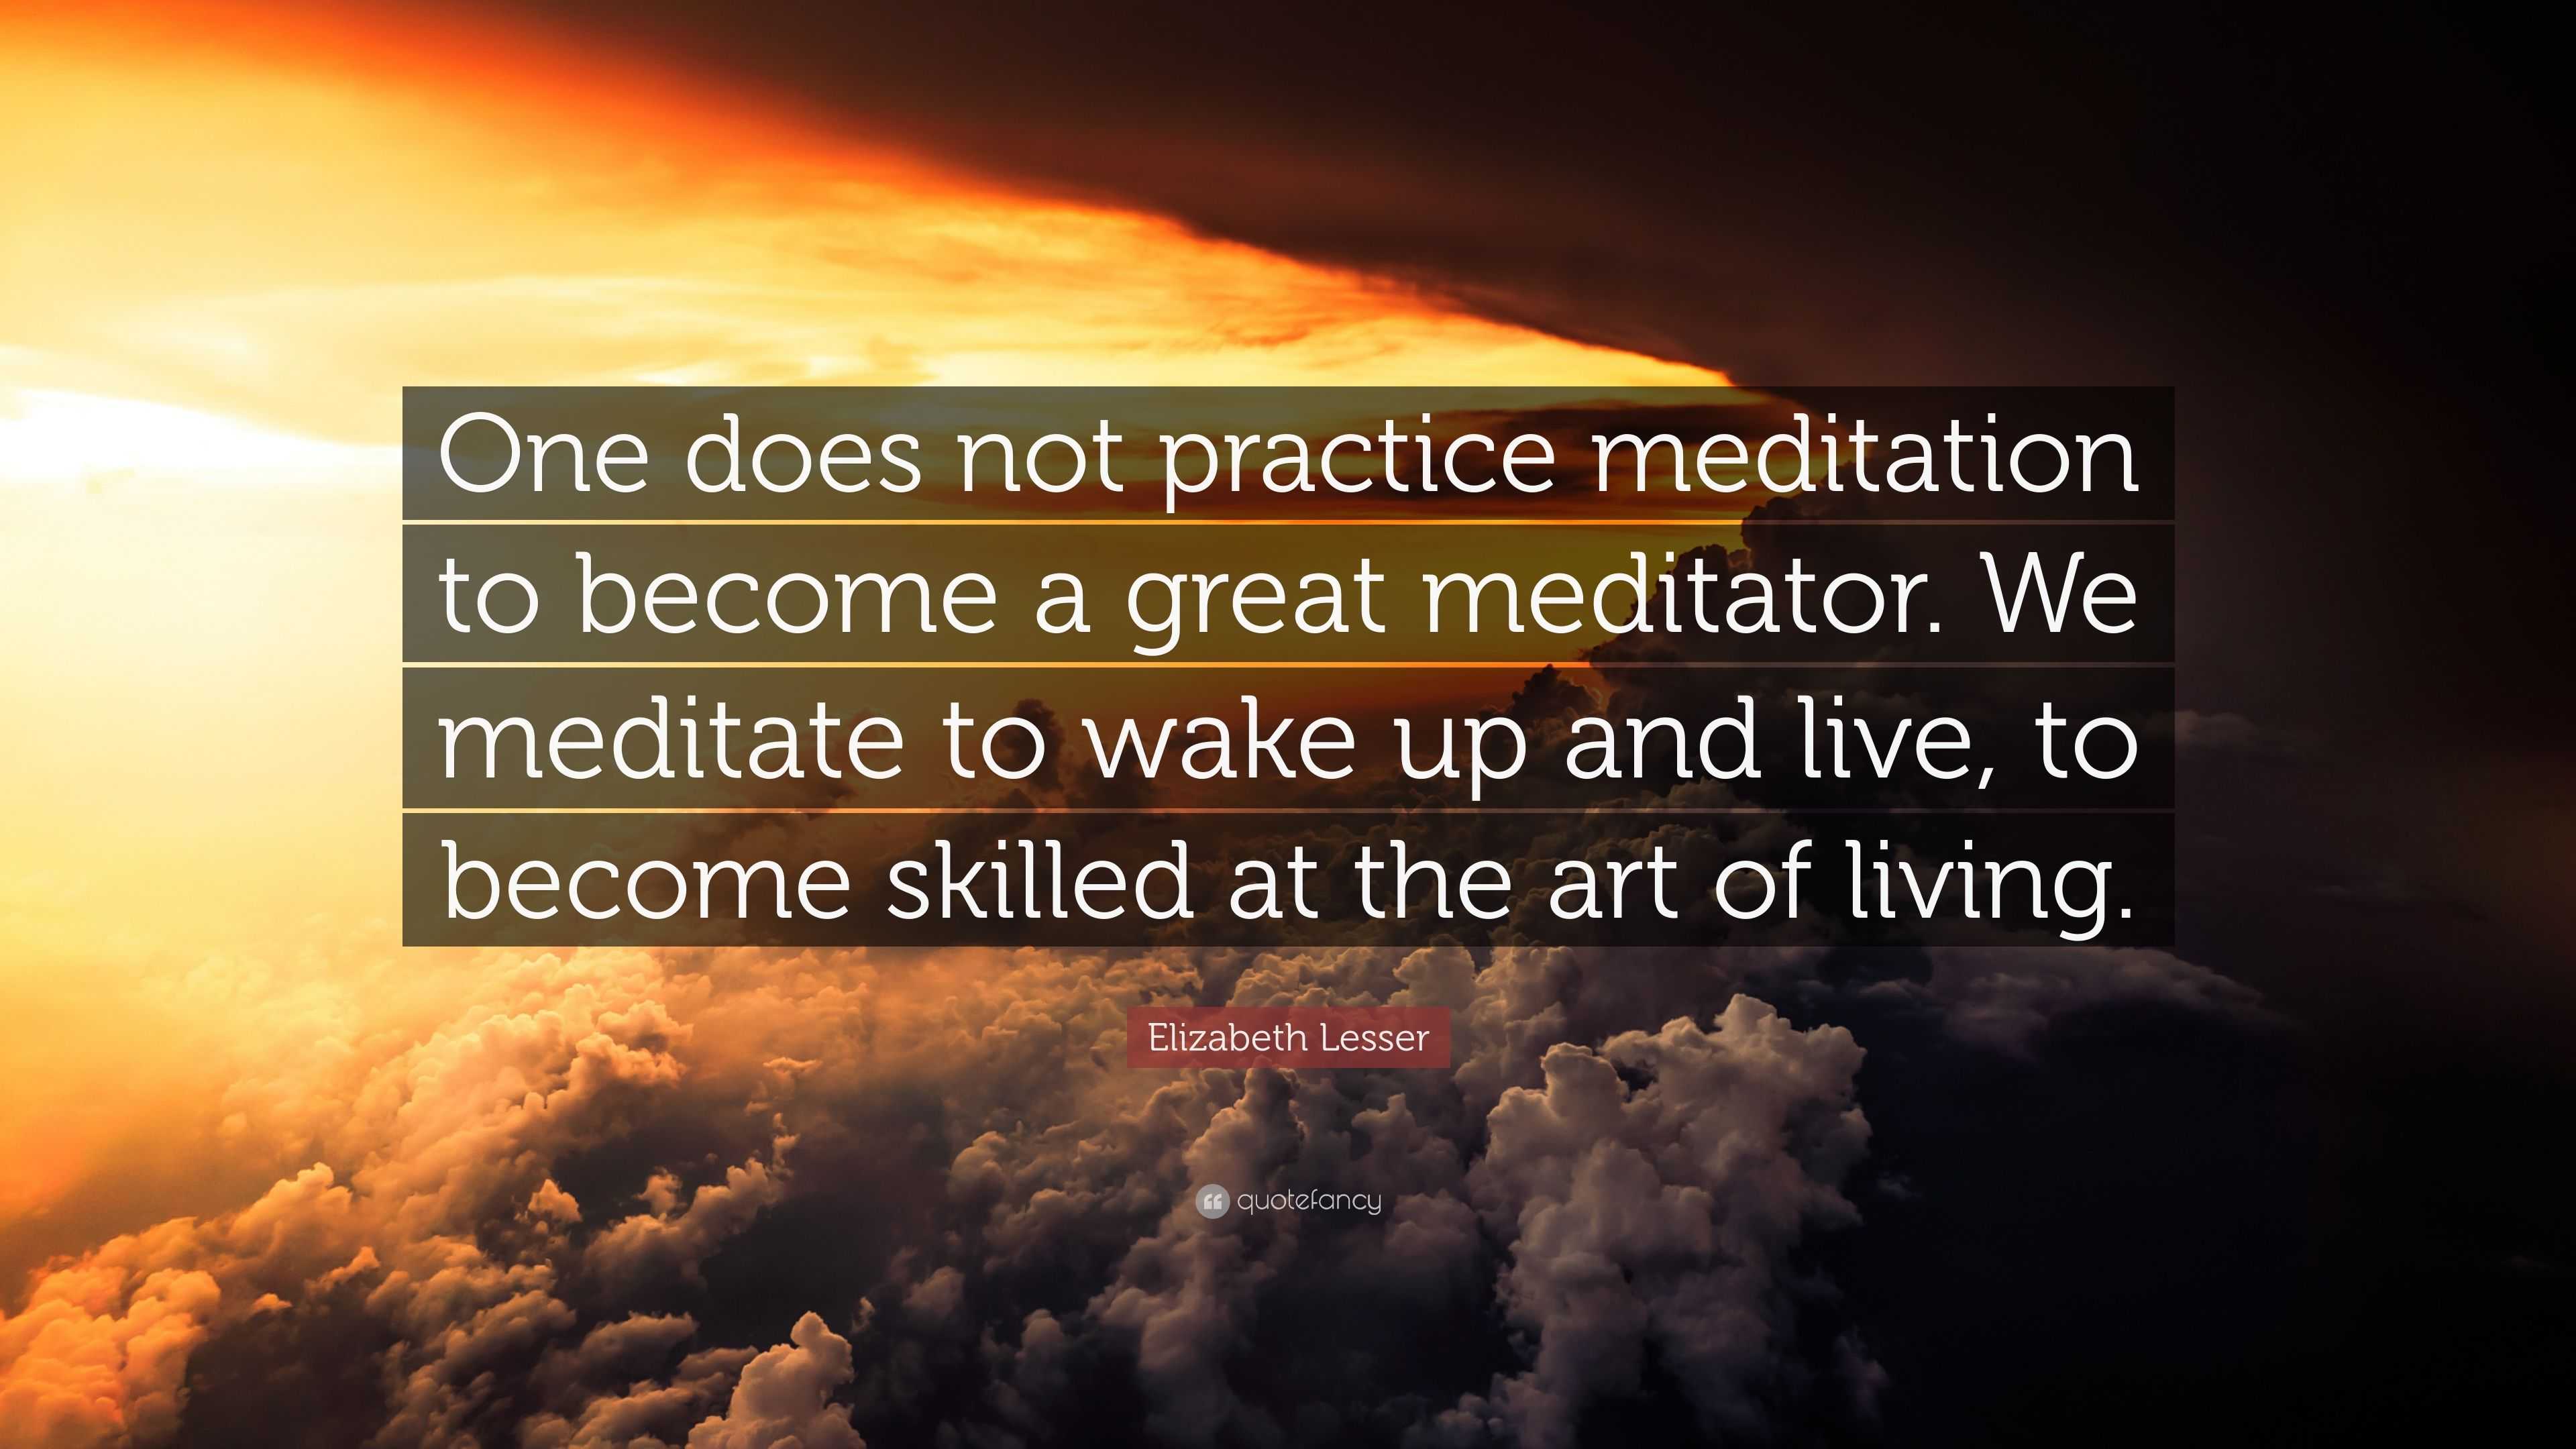 Elizabeth Lesser Quote: “One does not practice meditation to become a ...